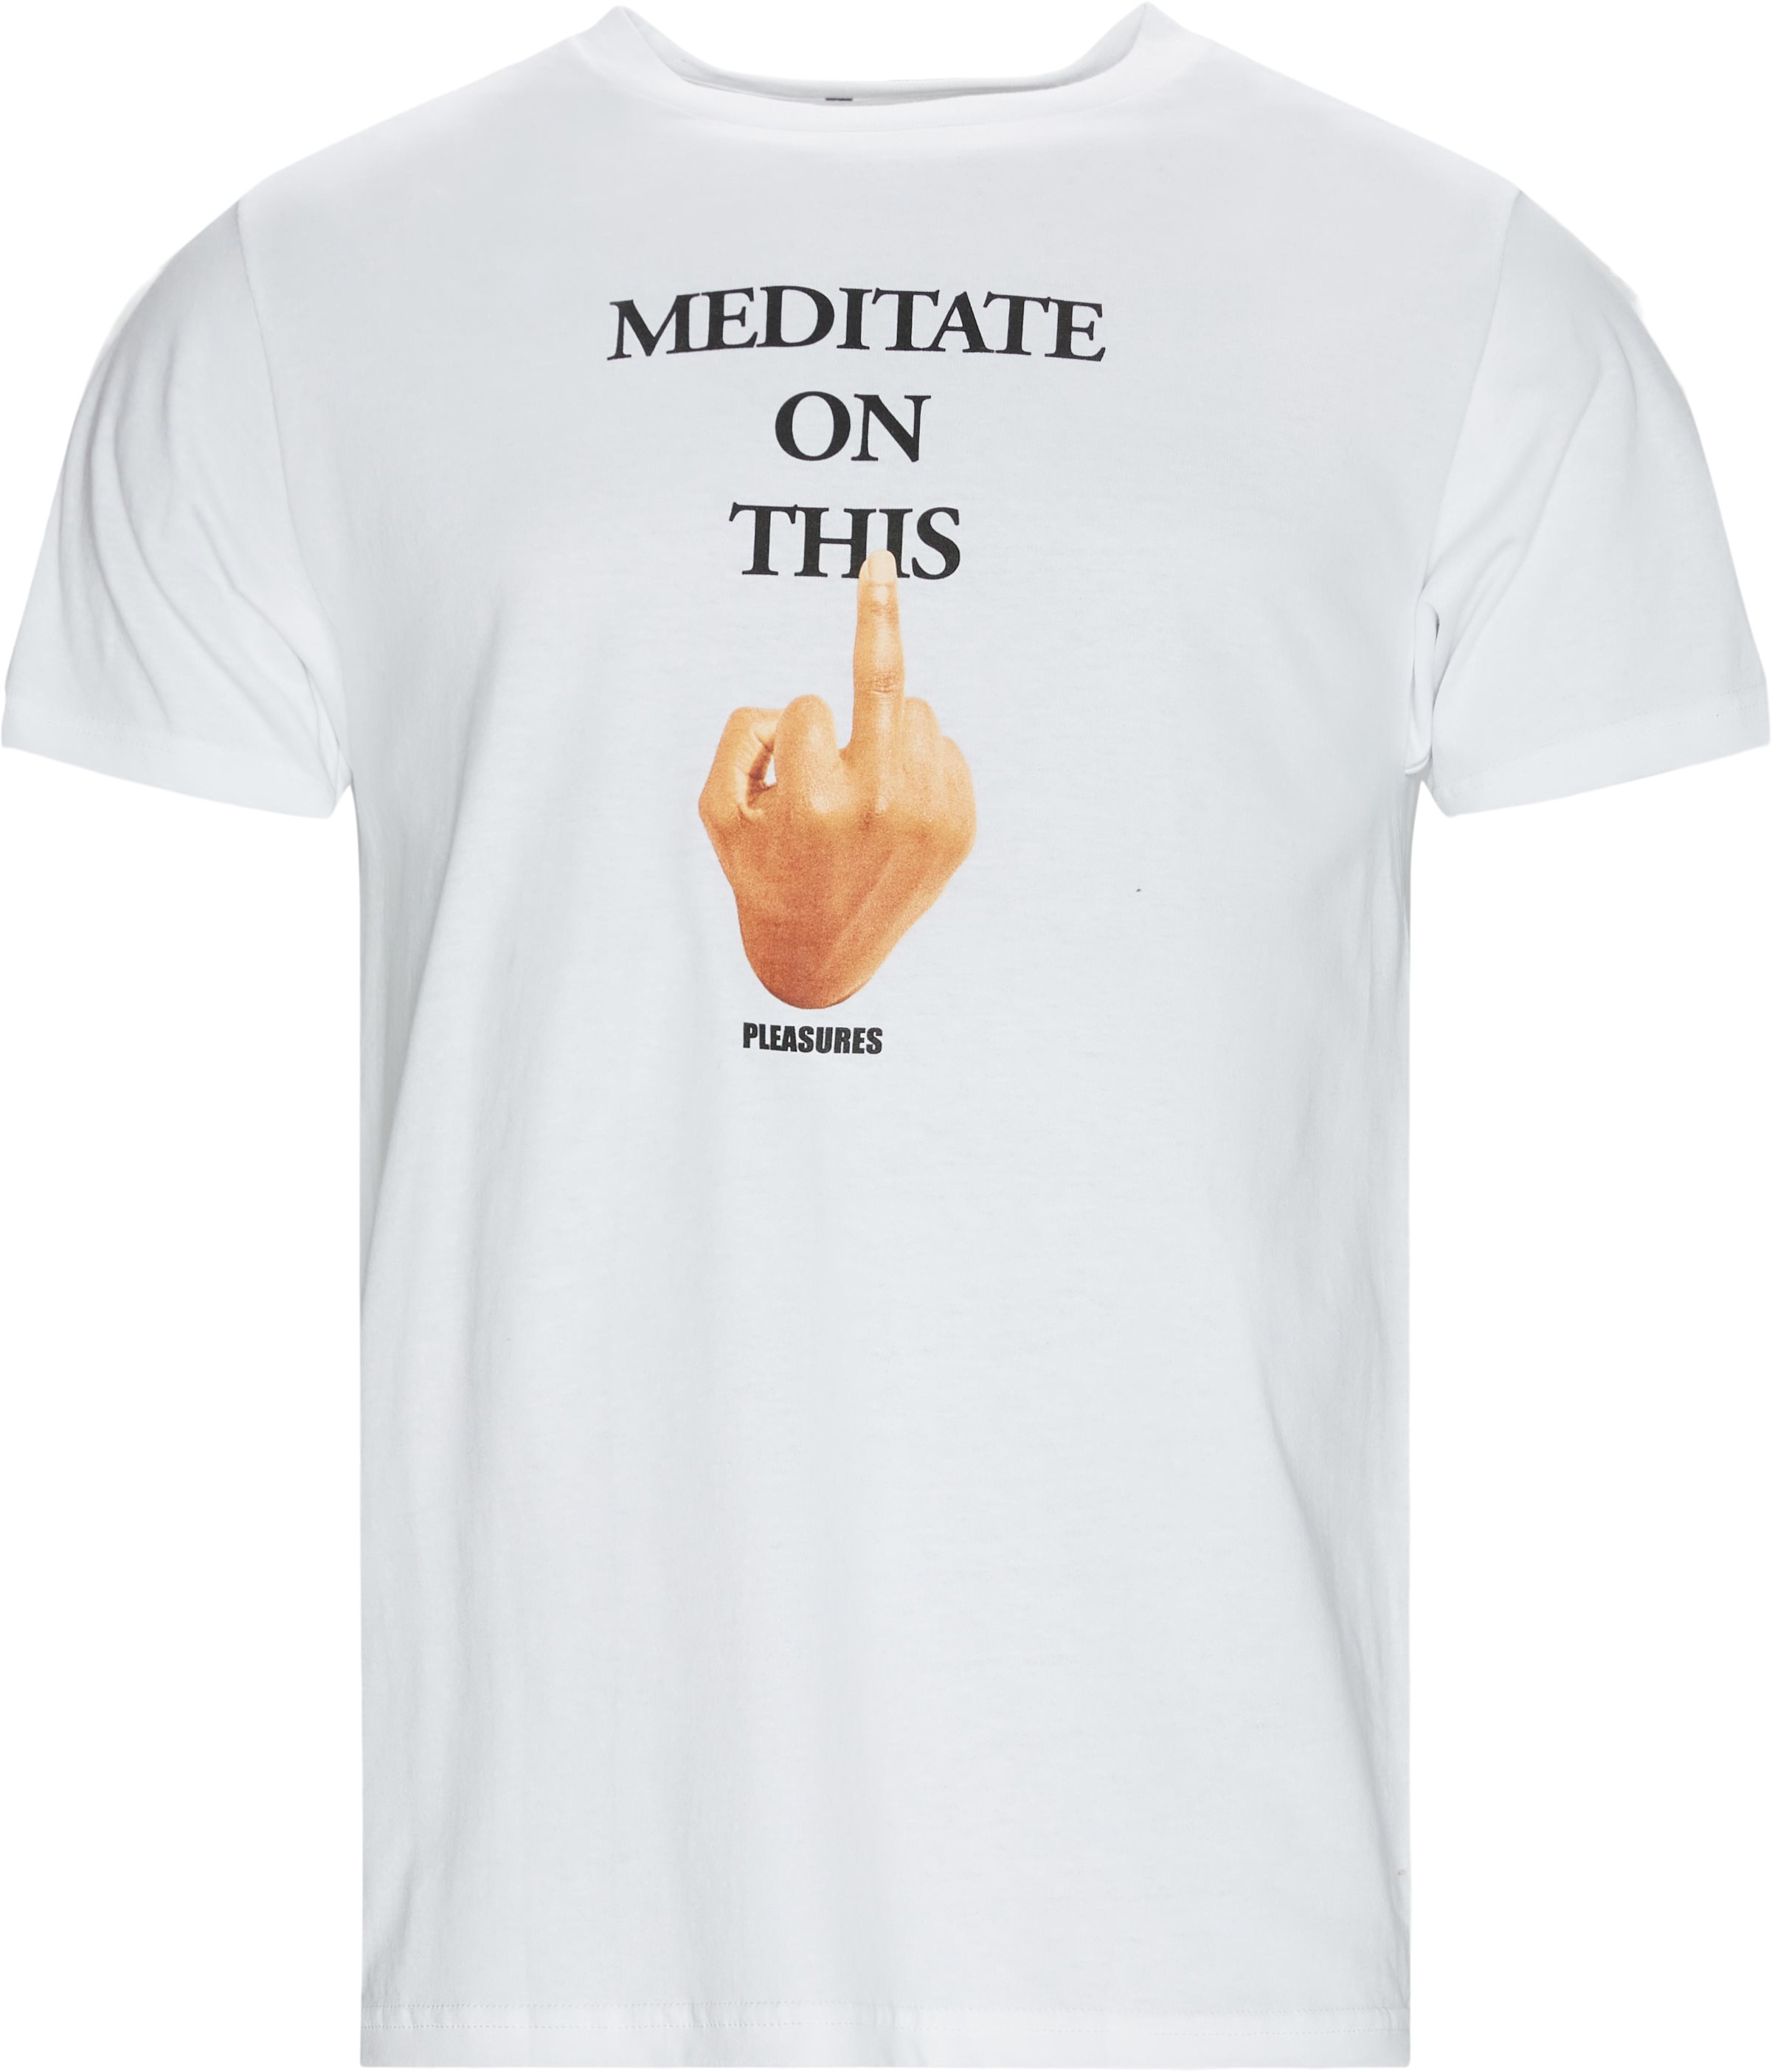 Message Tee - T-shirts - Regular fit - White